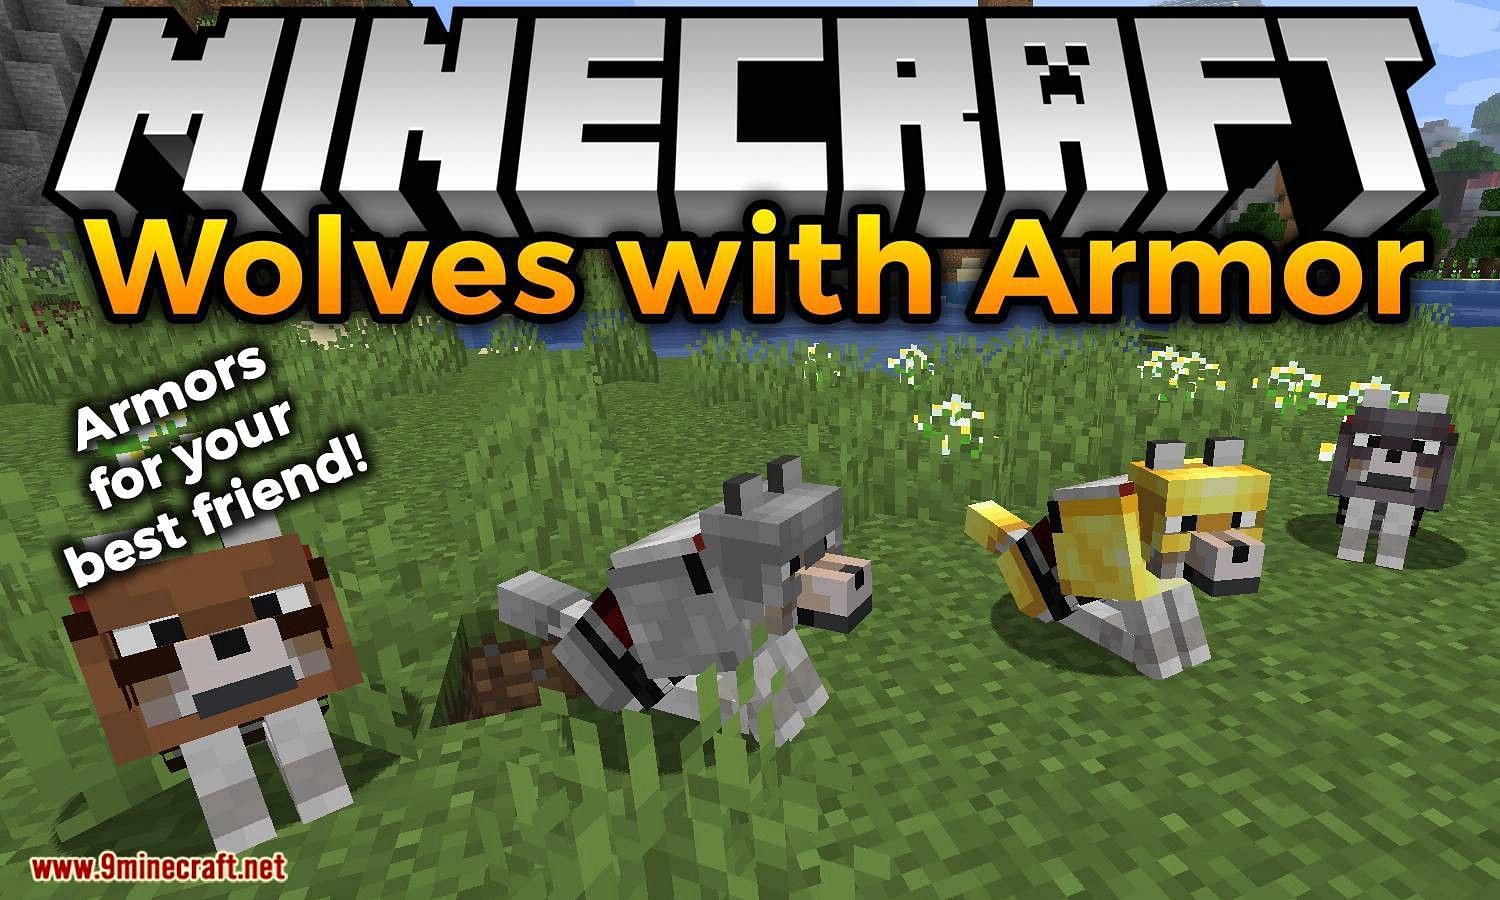 Wolves with armour mod (Image via Minecraft)